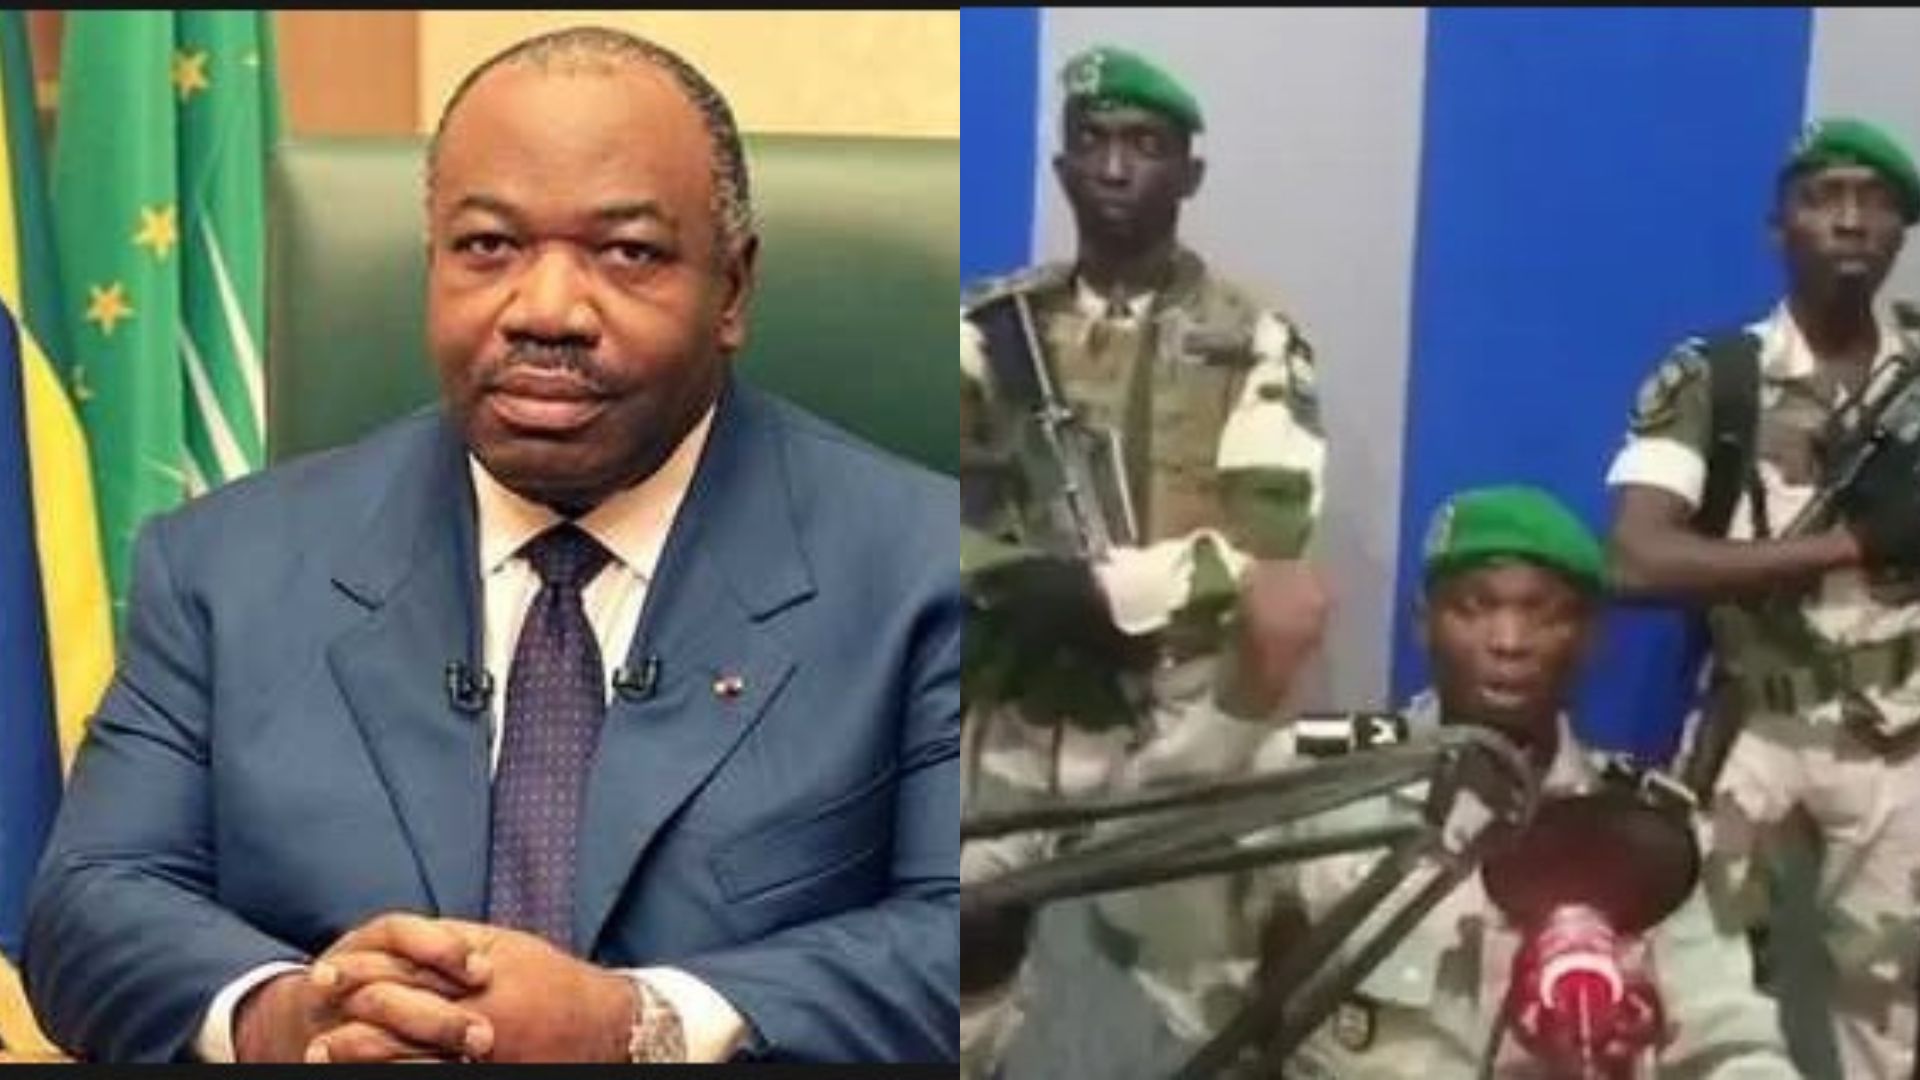 Military has taken over government in Gabon